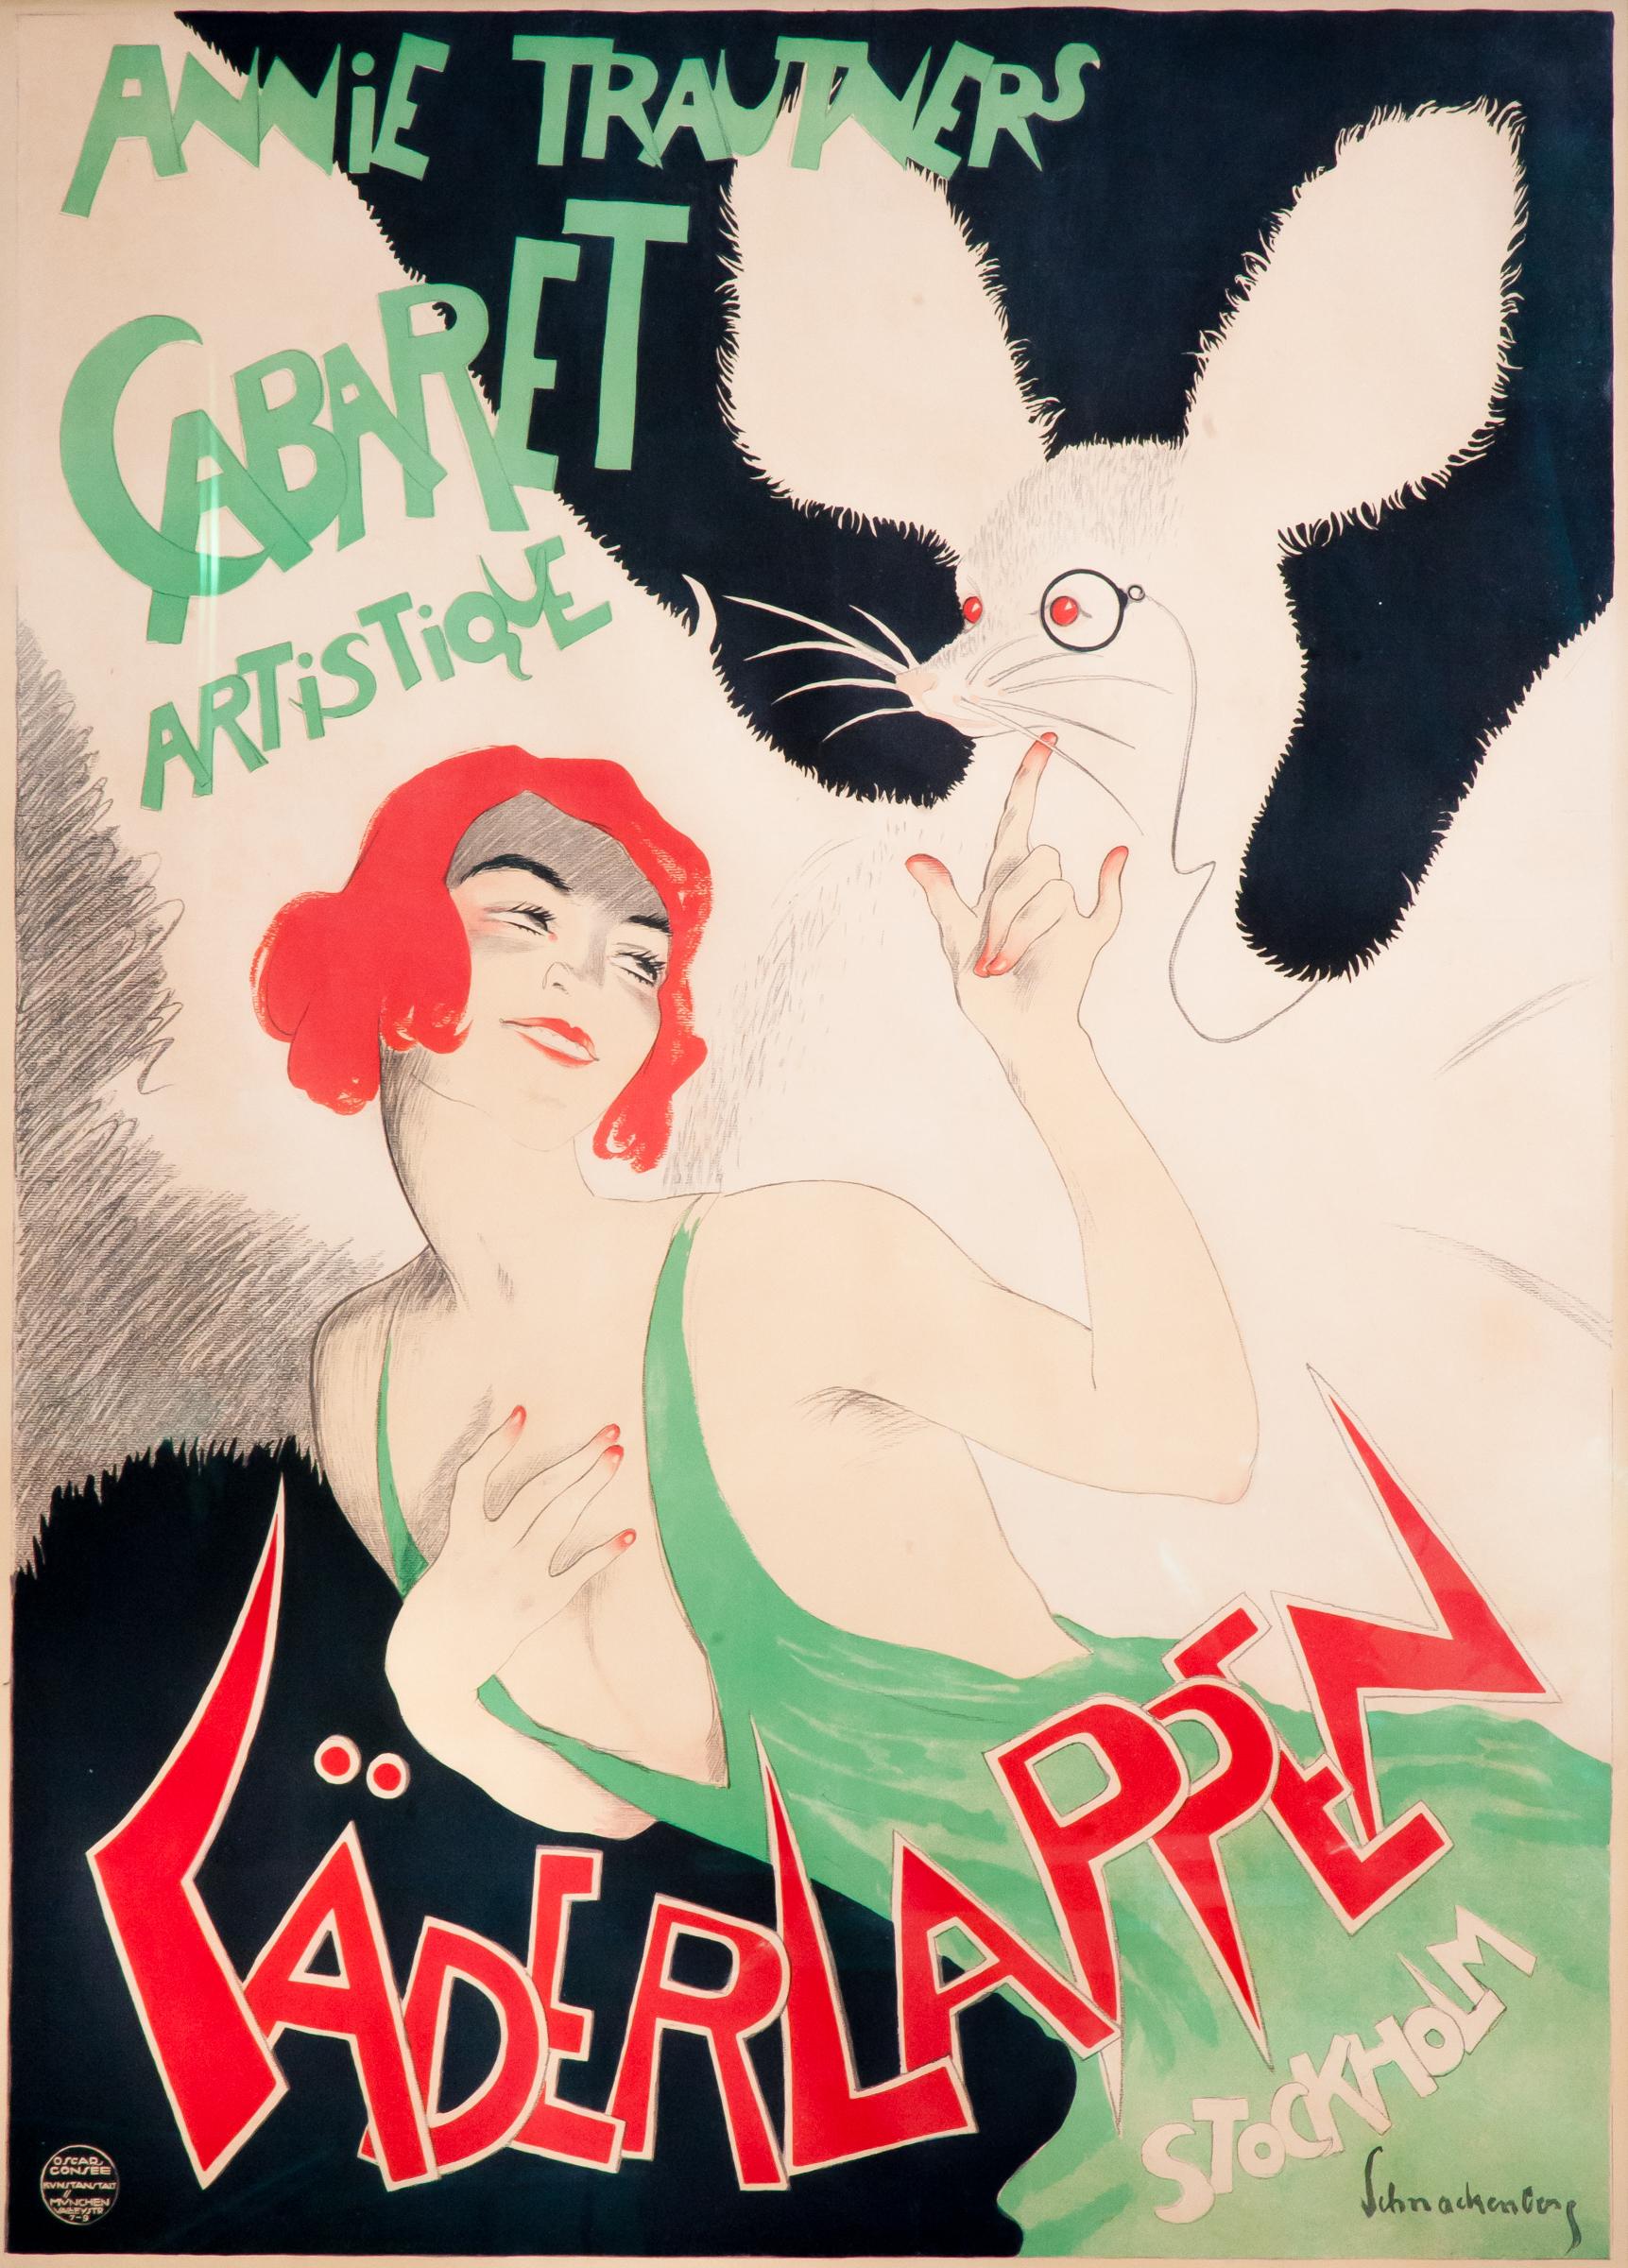 Printed by Oscar Consee, Munich, 1922

Not much is known about this Stockholm-based cabaret act. Translating literally as Bat Man, we see a young dancer tease an oversized bat wearing a monocle -- a truly bizarre but beautiful design. (text by Jack